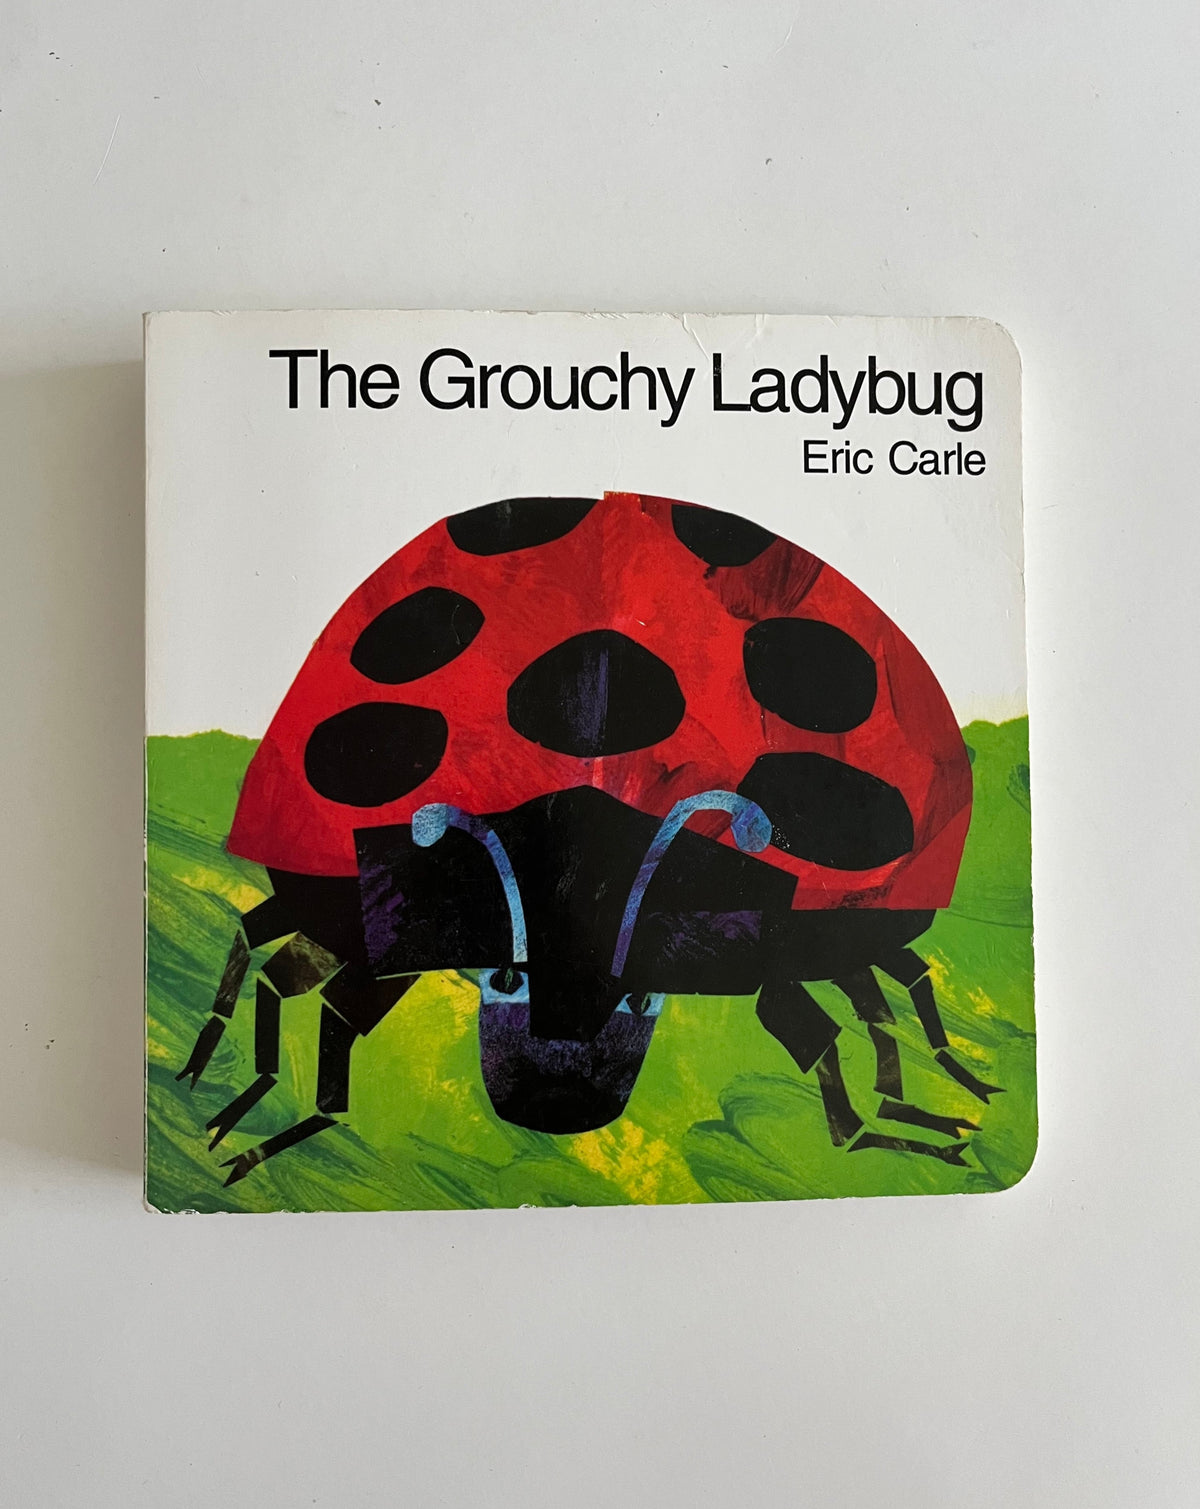 The Grouchy Ladybug by Eric Cole